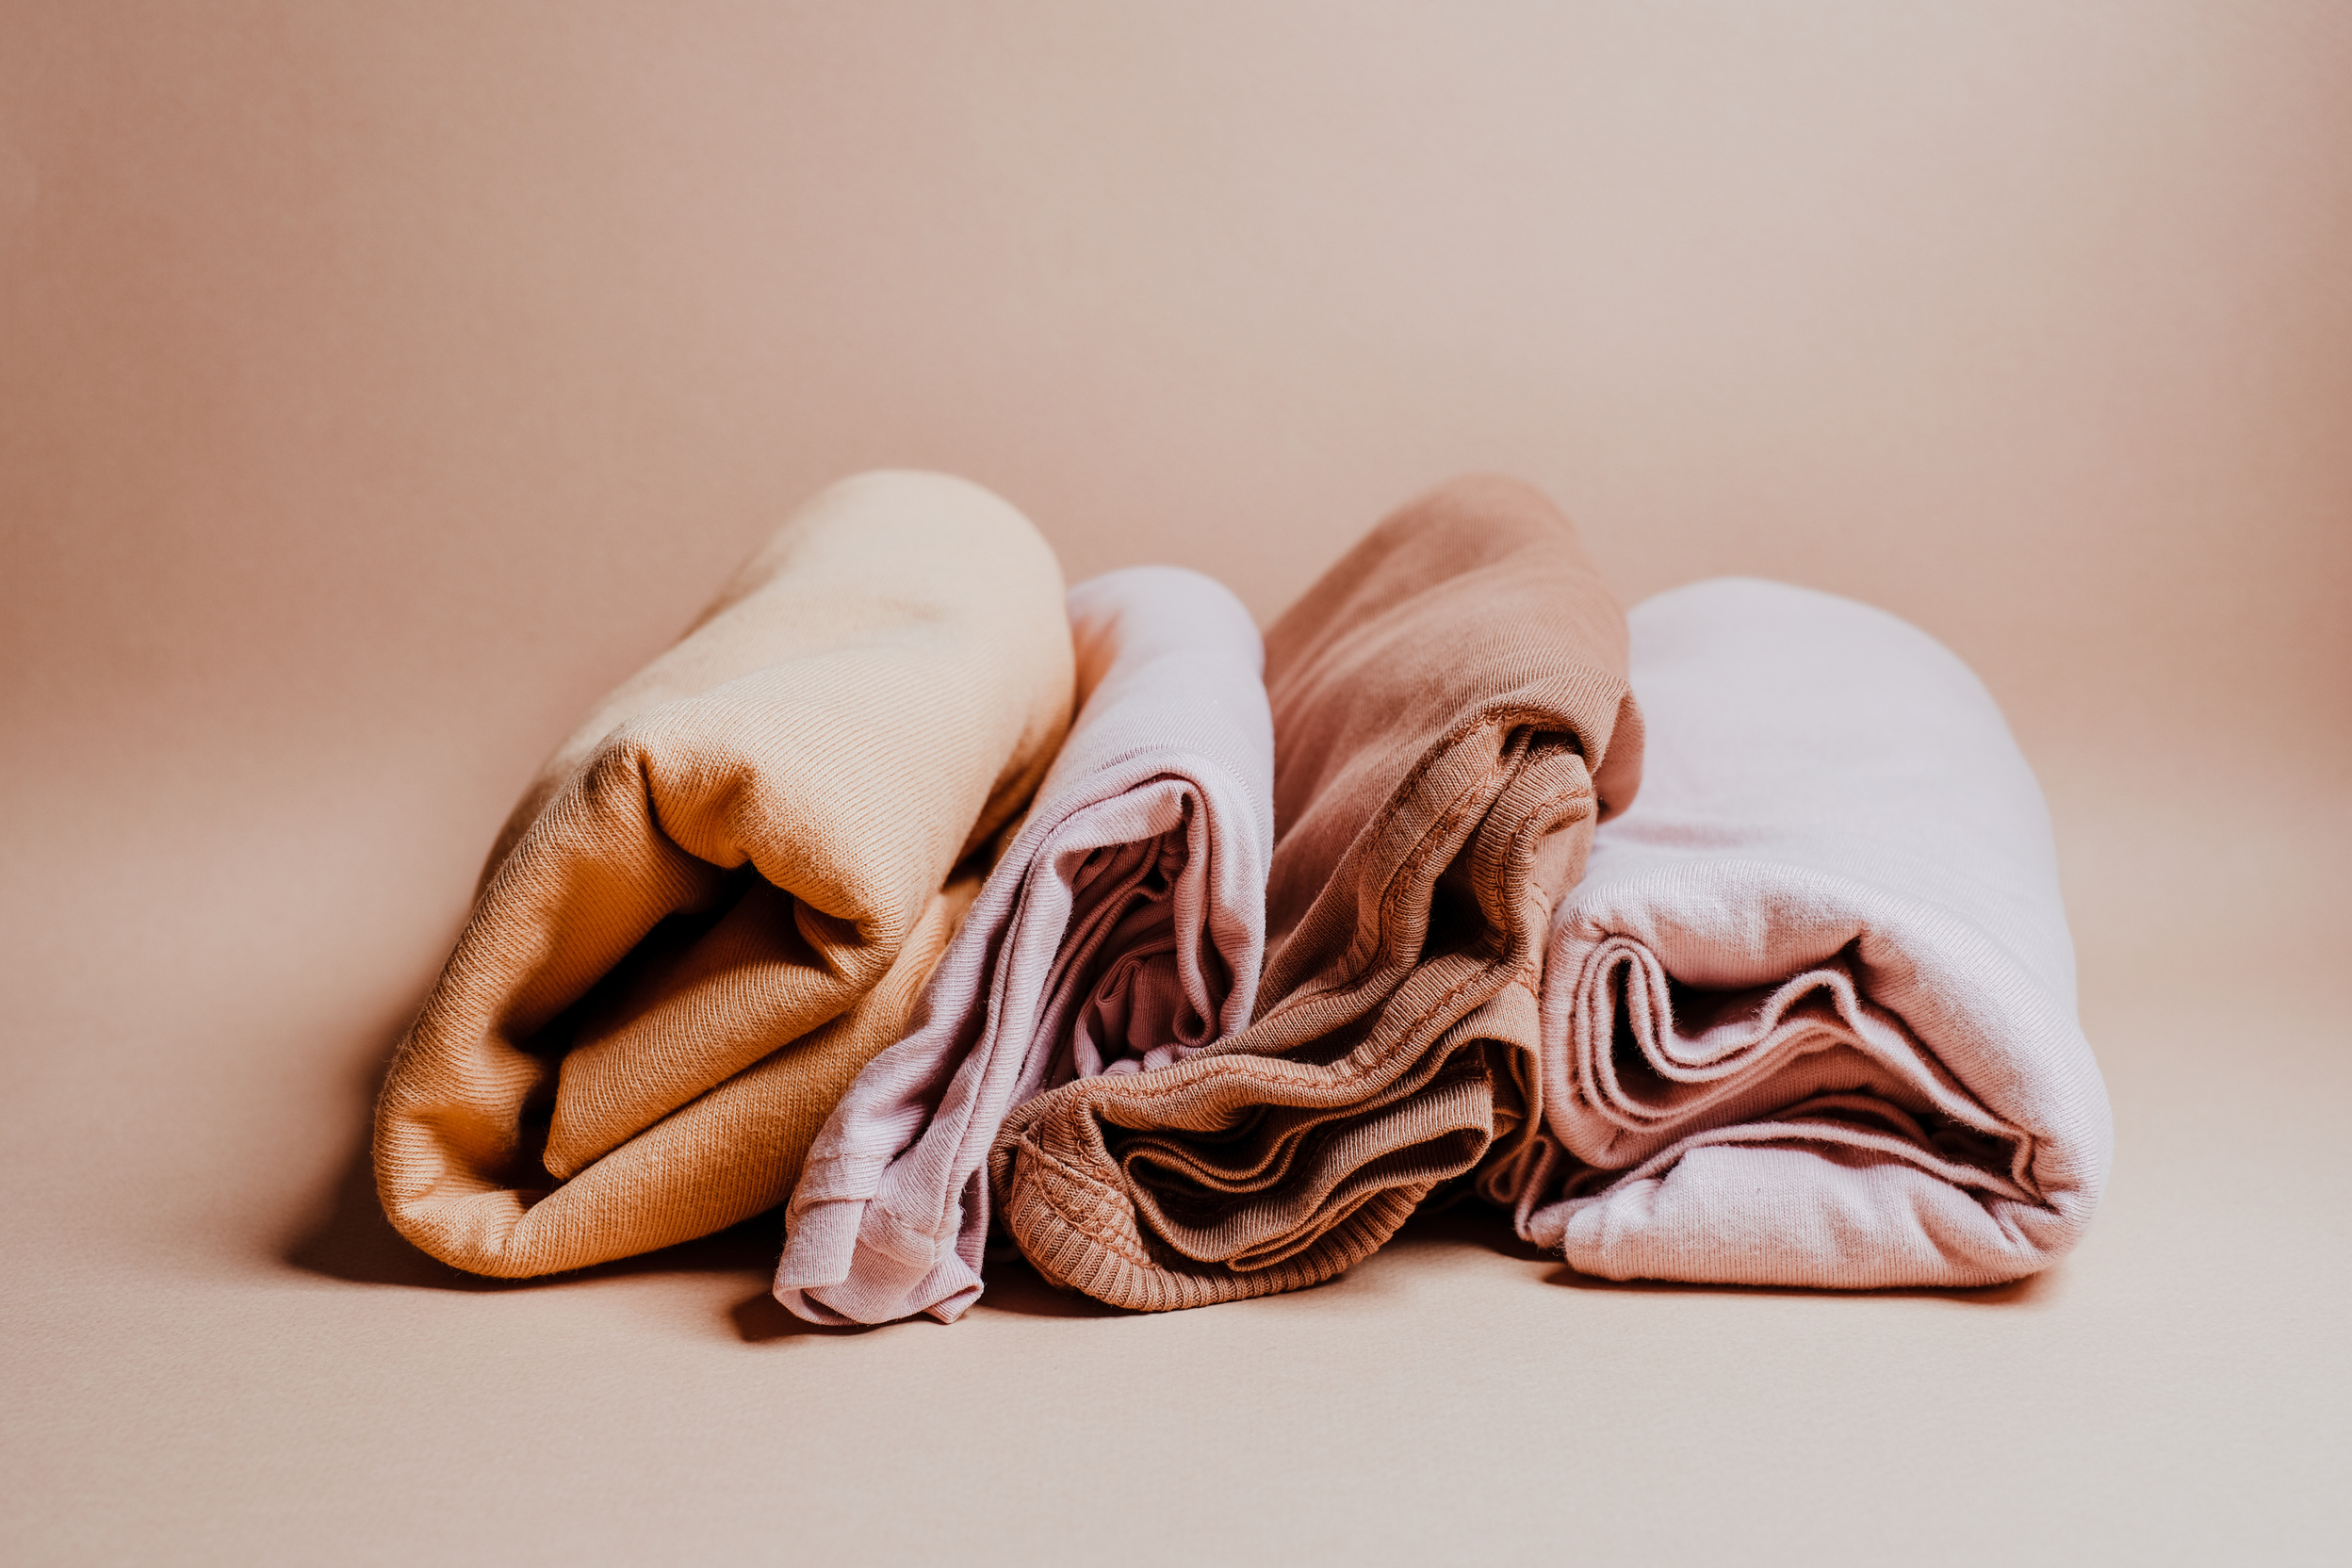 Folded Clothes on Beige Background